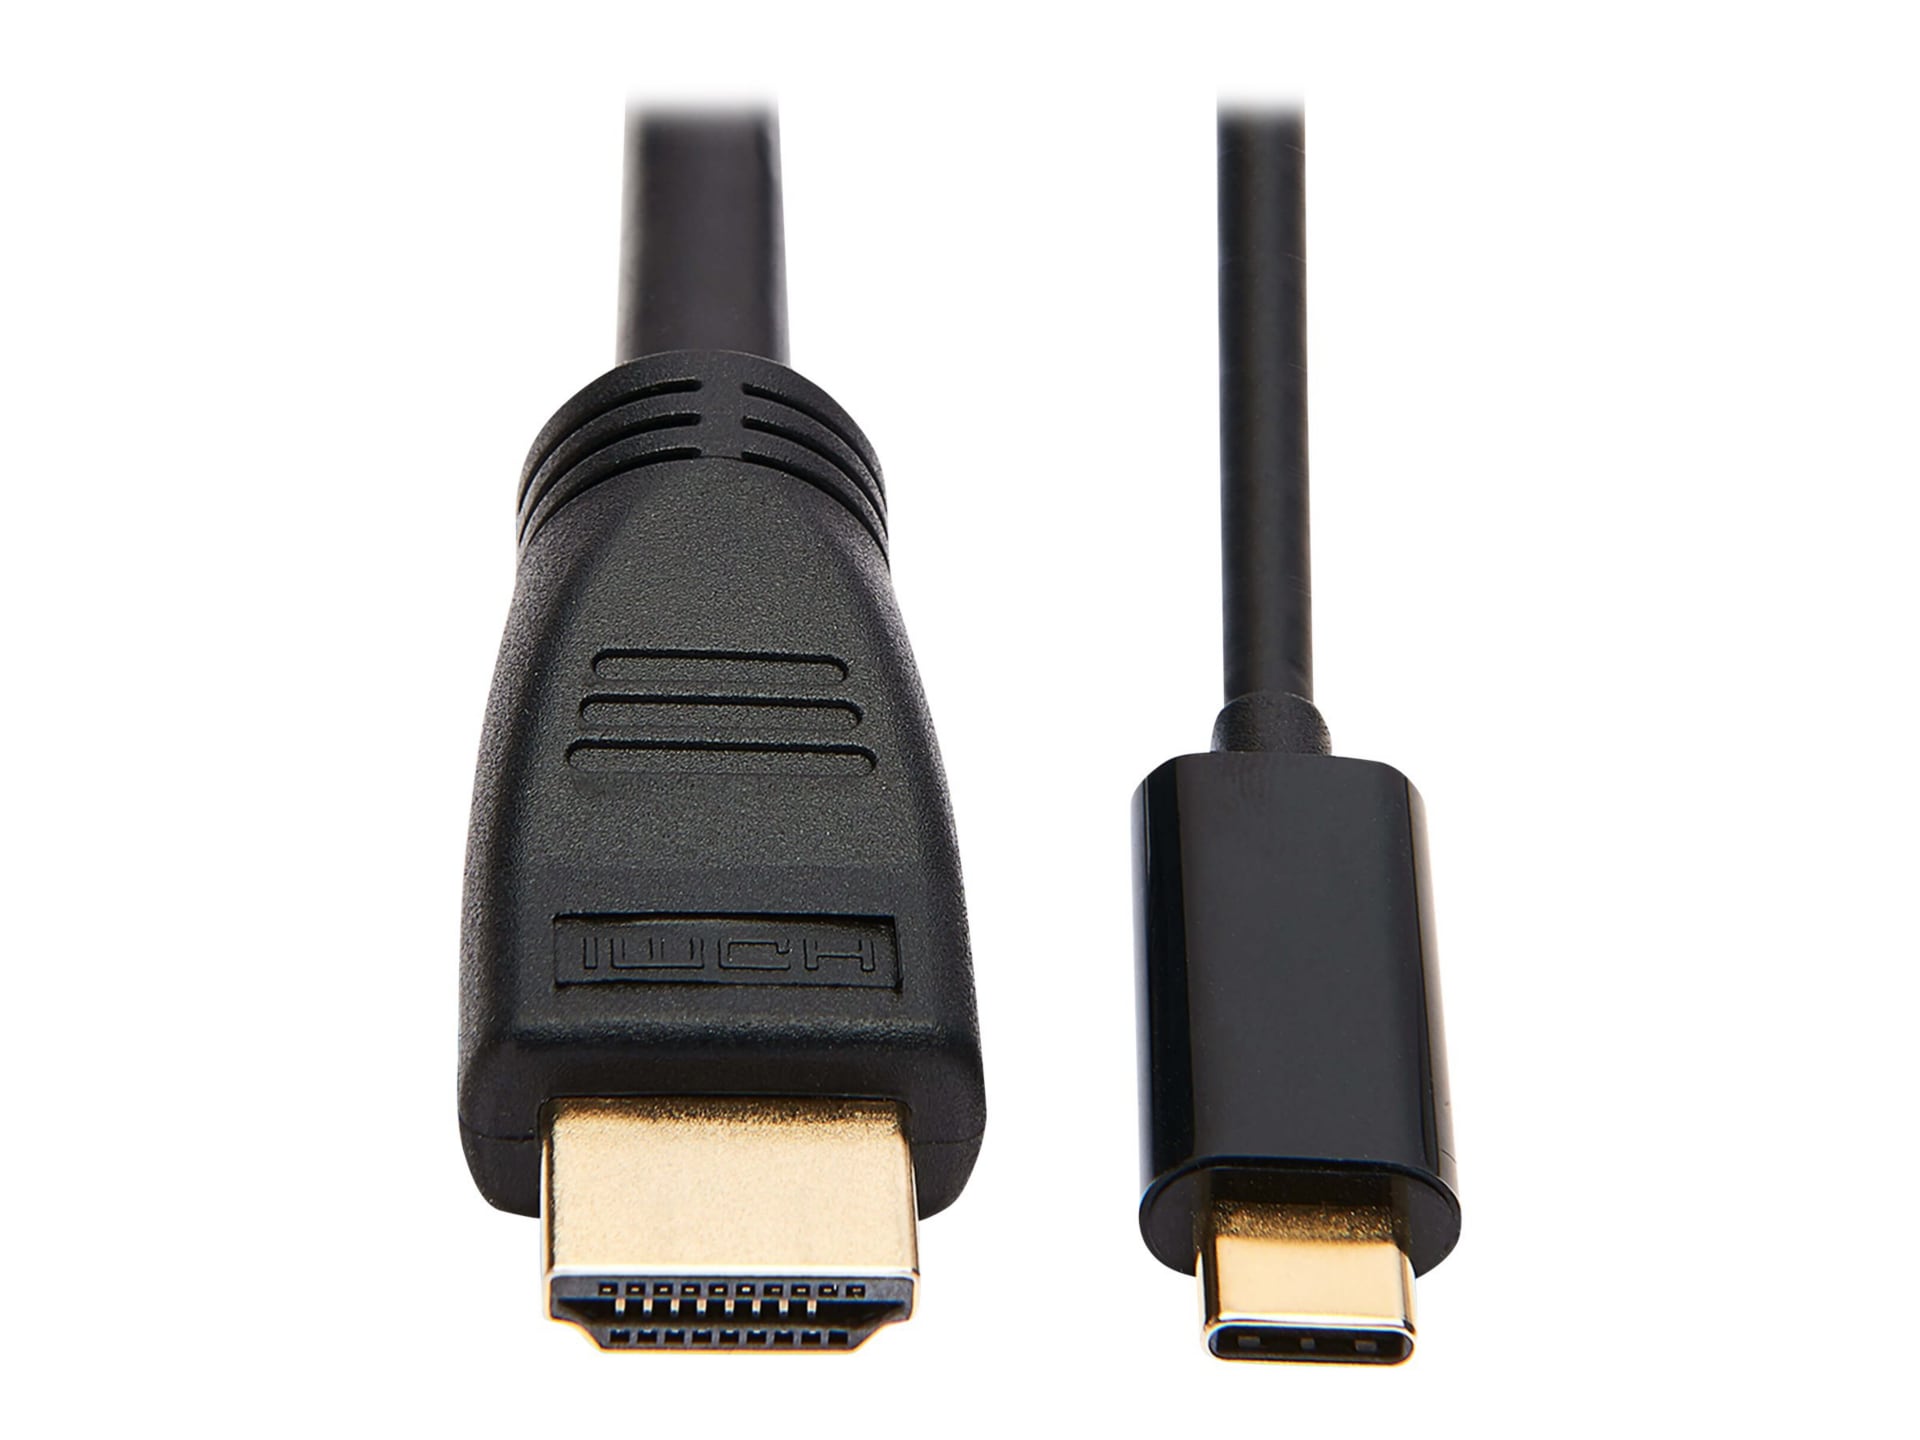 Tripp Lite USB C to HDMI Adapter Cable USB 3.1 4K@60Hz M/M USB-C Black 10ft - video cable - HDMI / USB - 10 ft